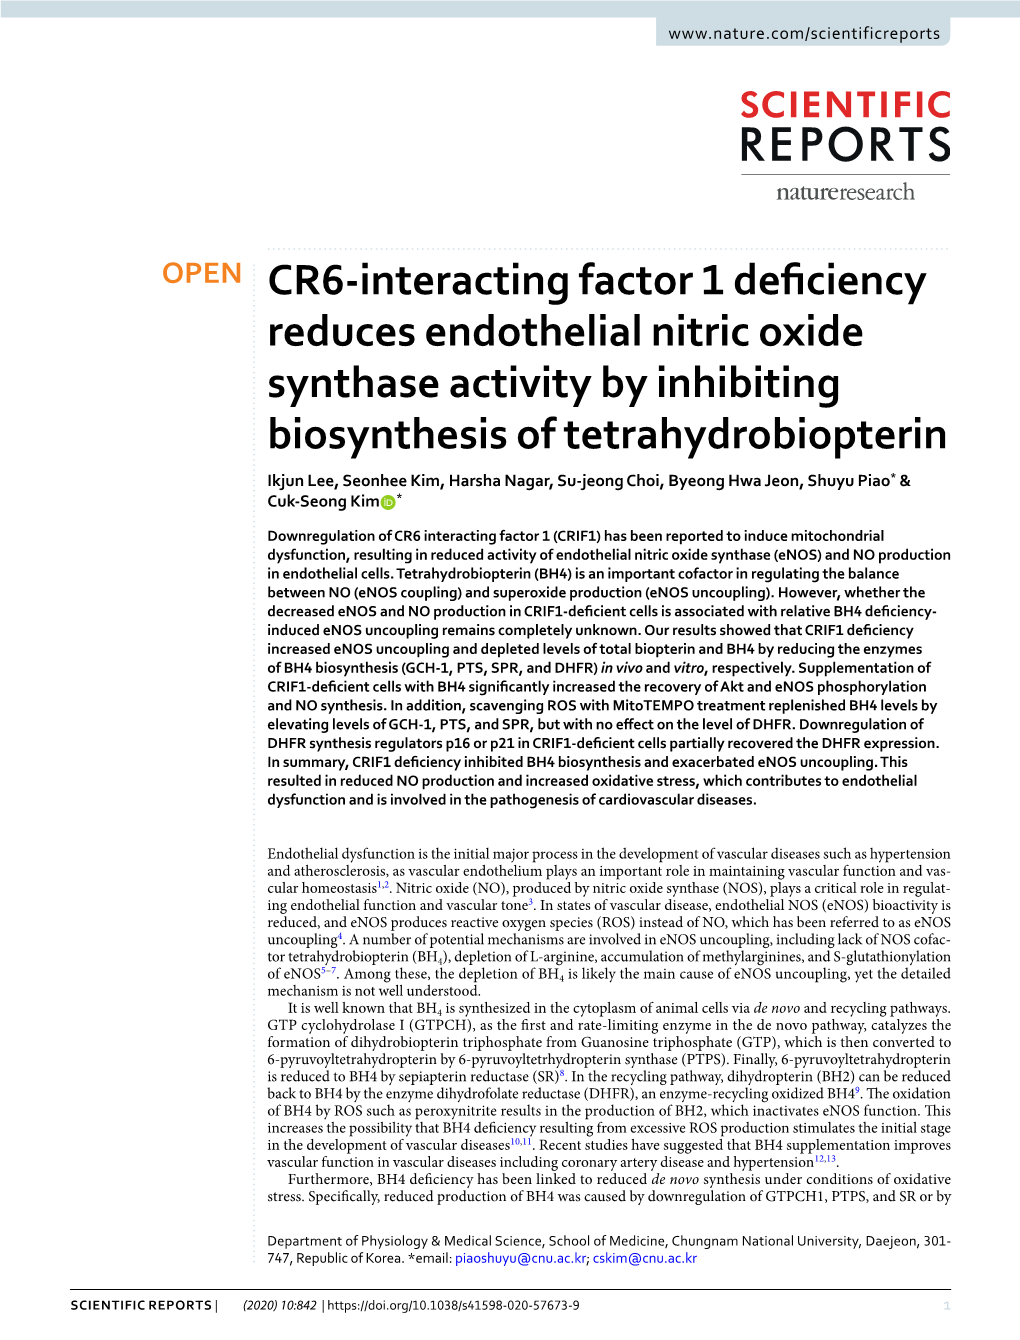 CR6-Interacting Factor 1 Deficiency Reduces Endothelial Nitric Oxide